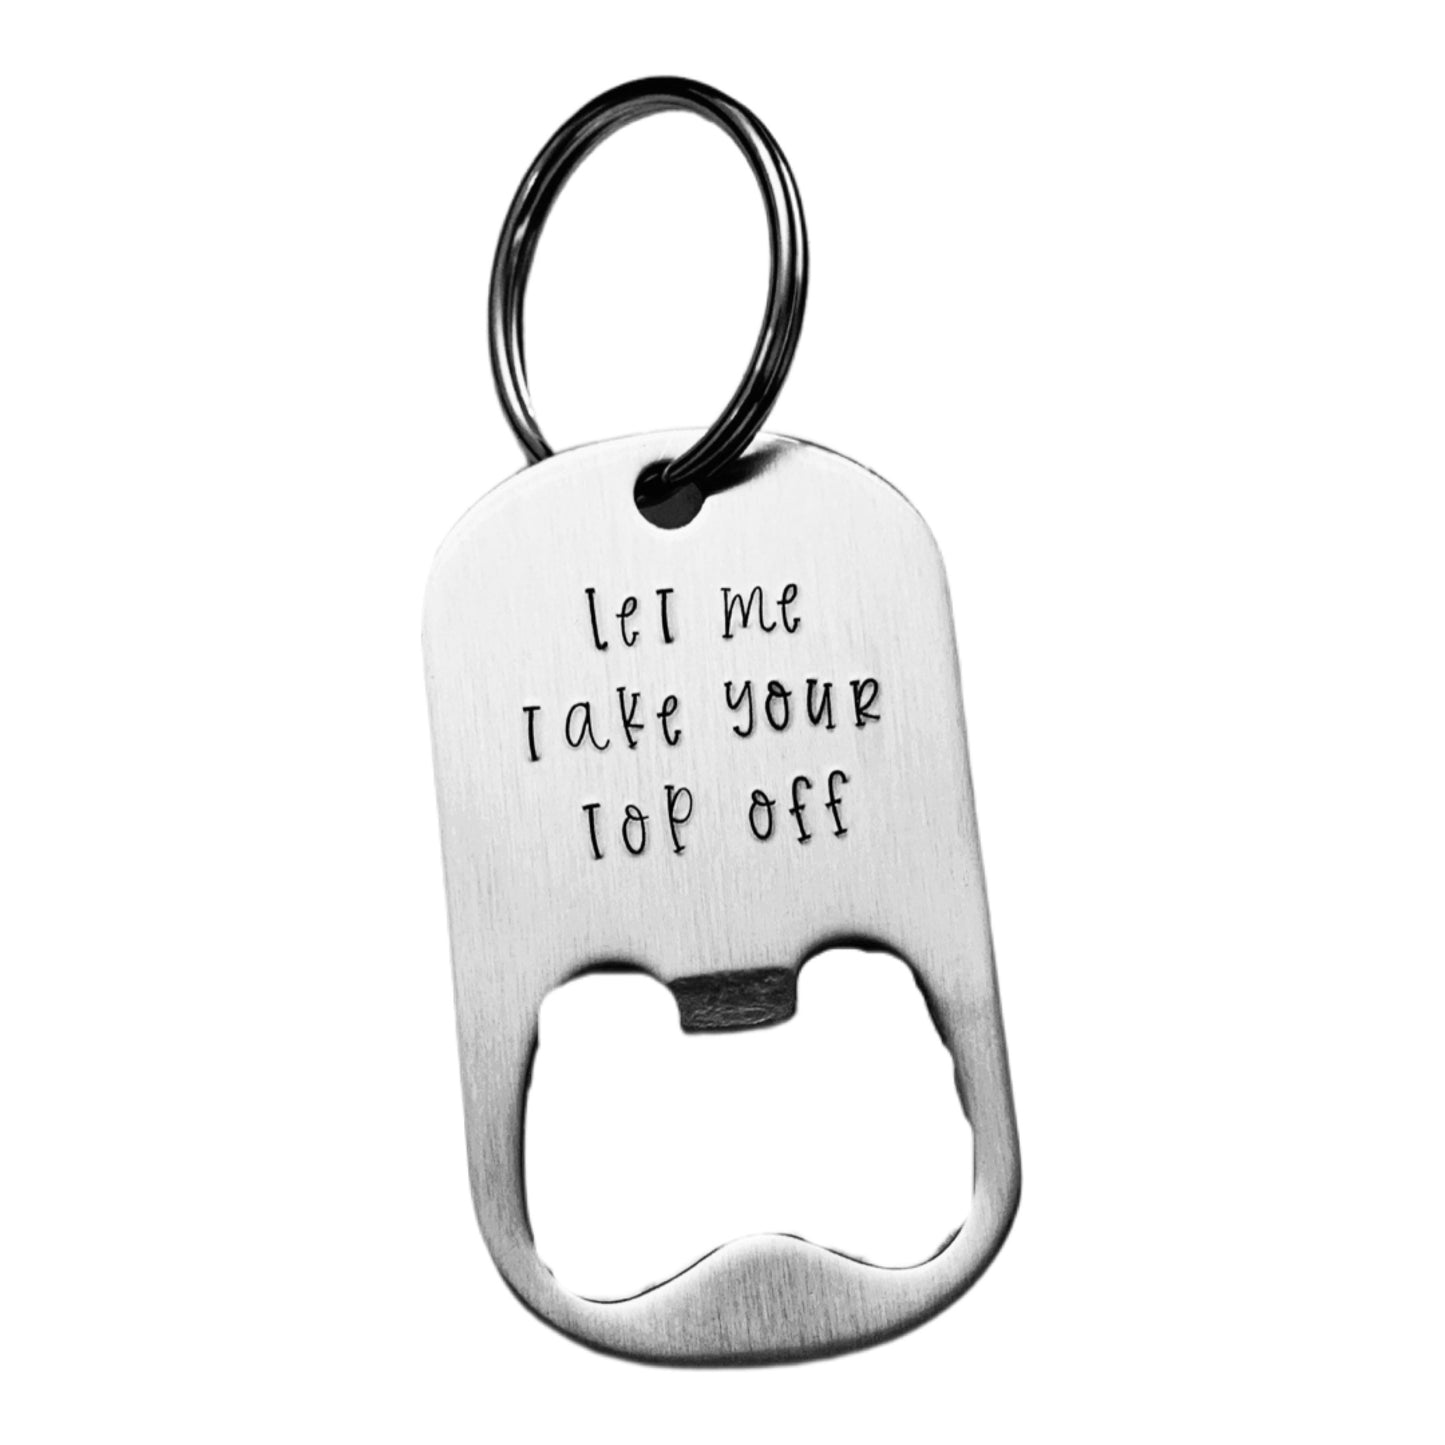 Let Me Take Your Top Off | Bottle Opener Key Chain